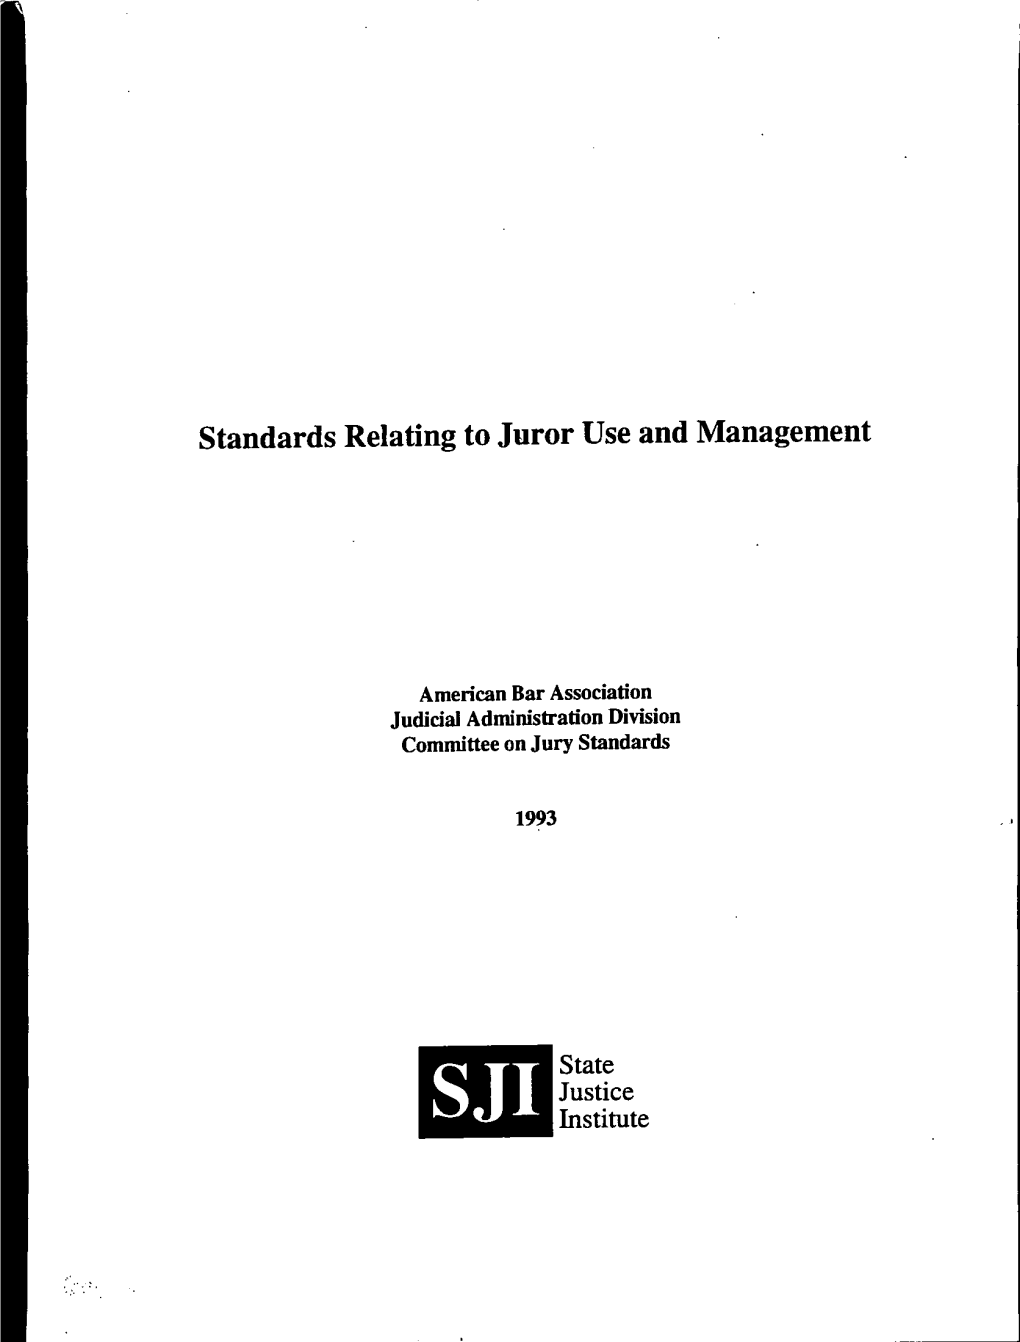 Standards Relating to Juror Use and Management